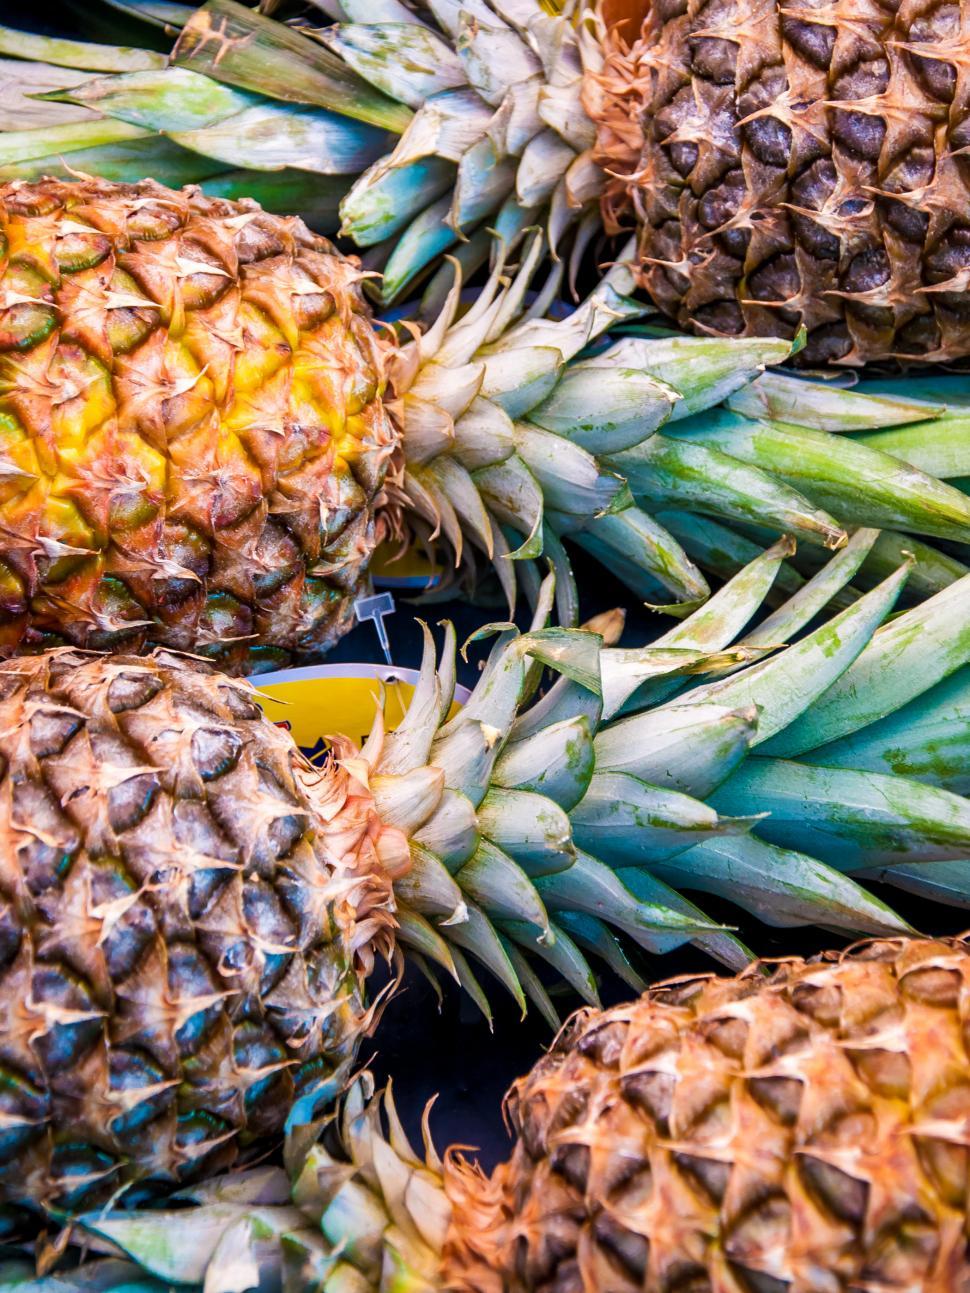 Download Free Stock Photo of A lot of pineapple fruit background 